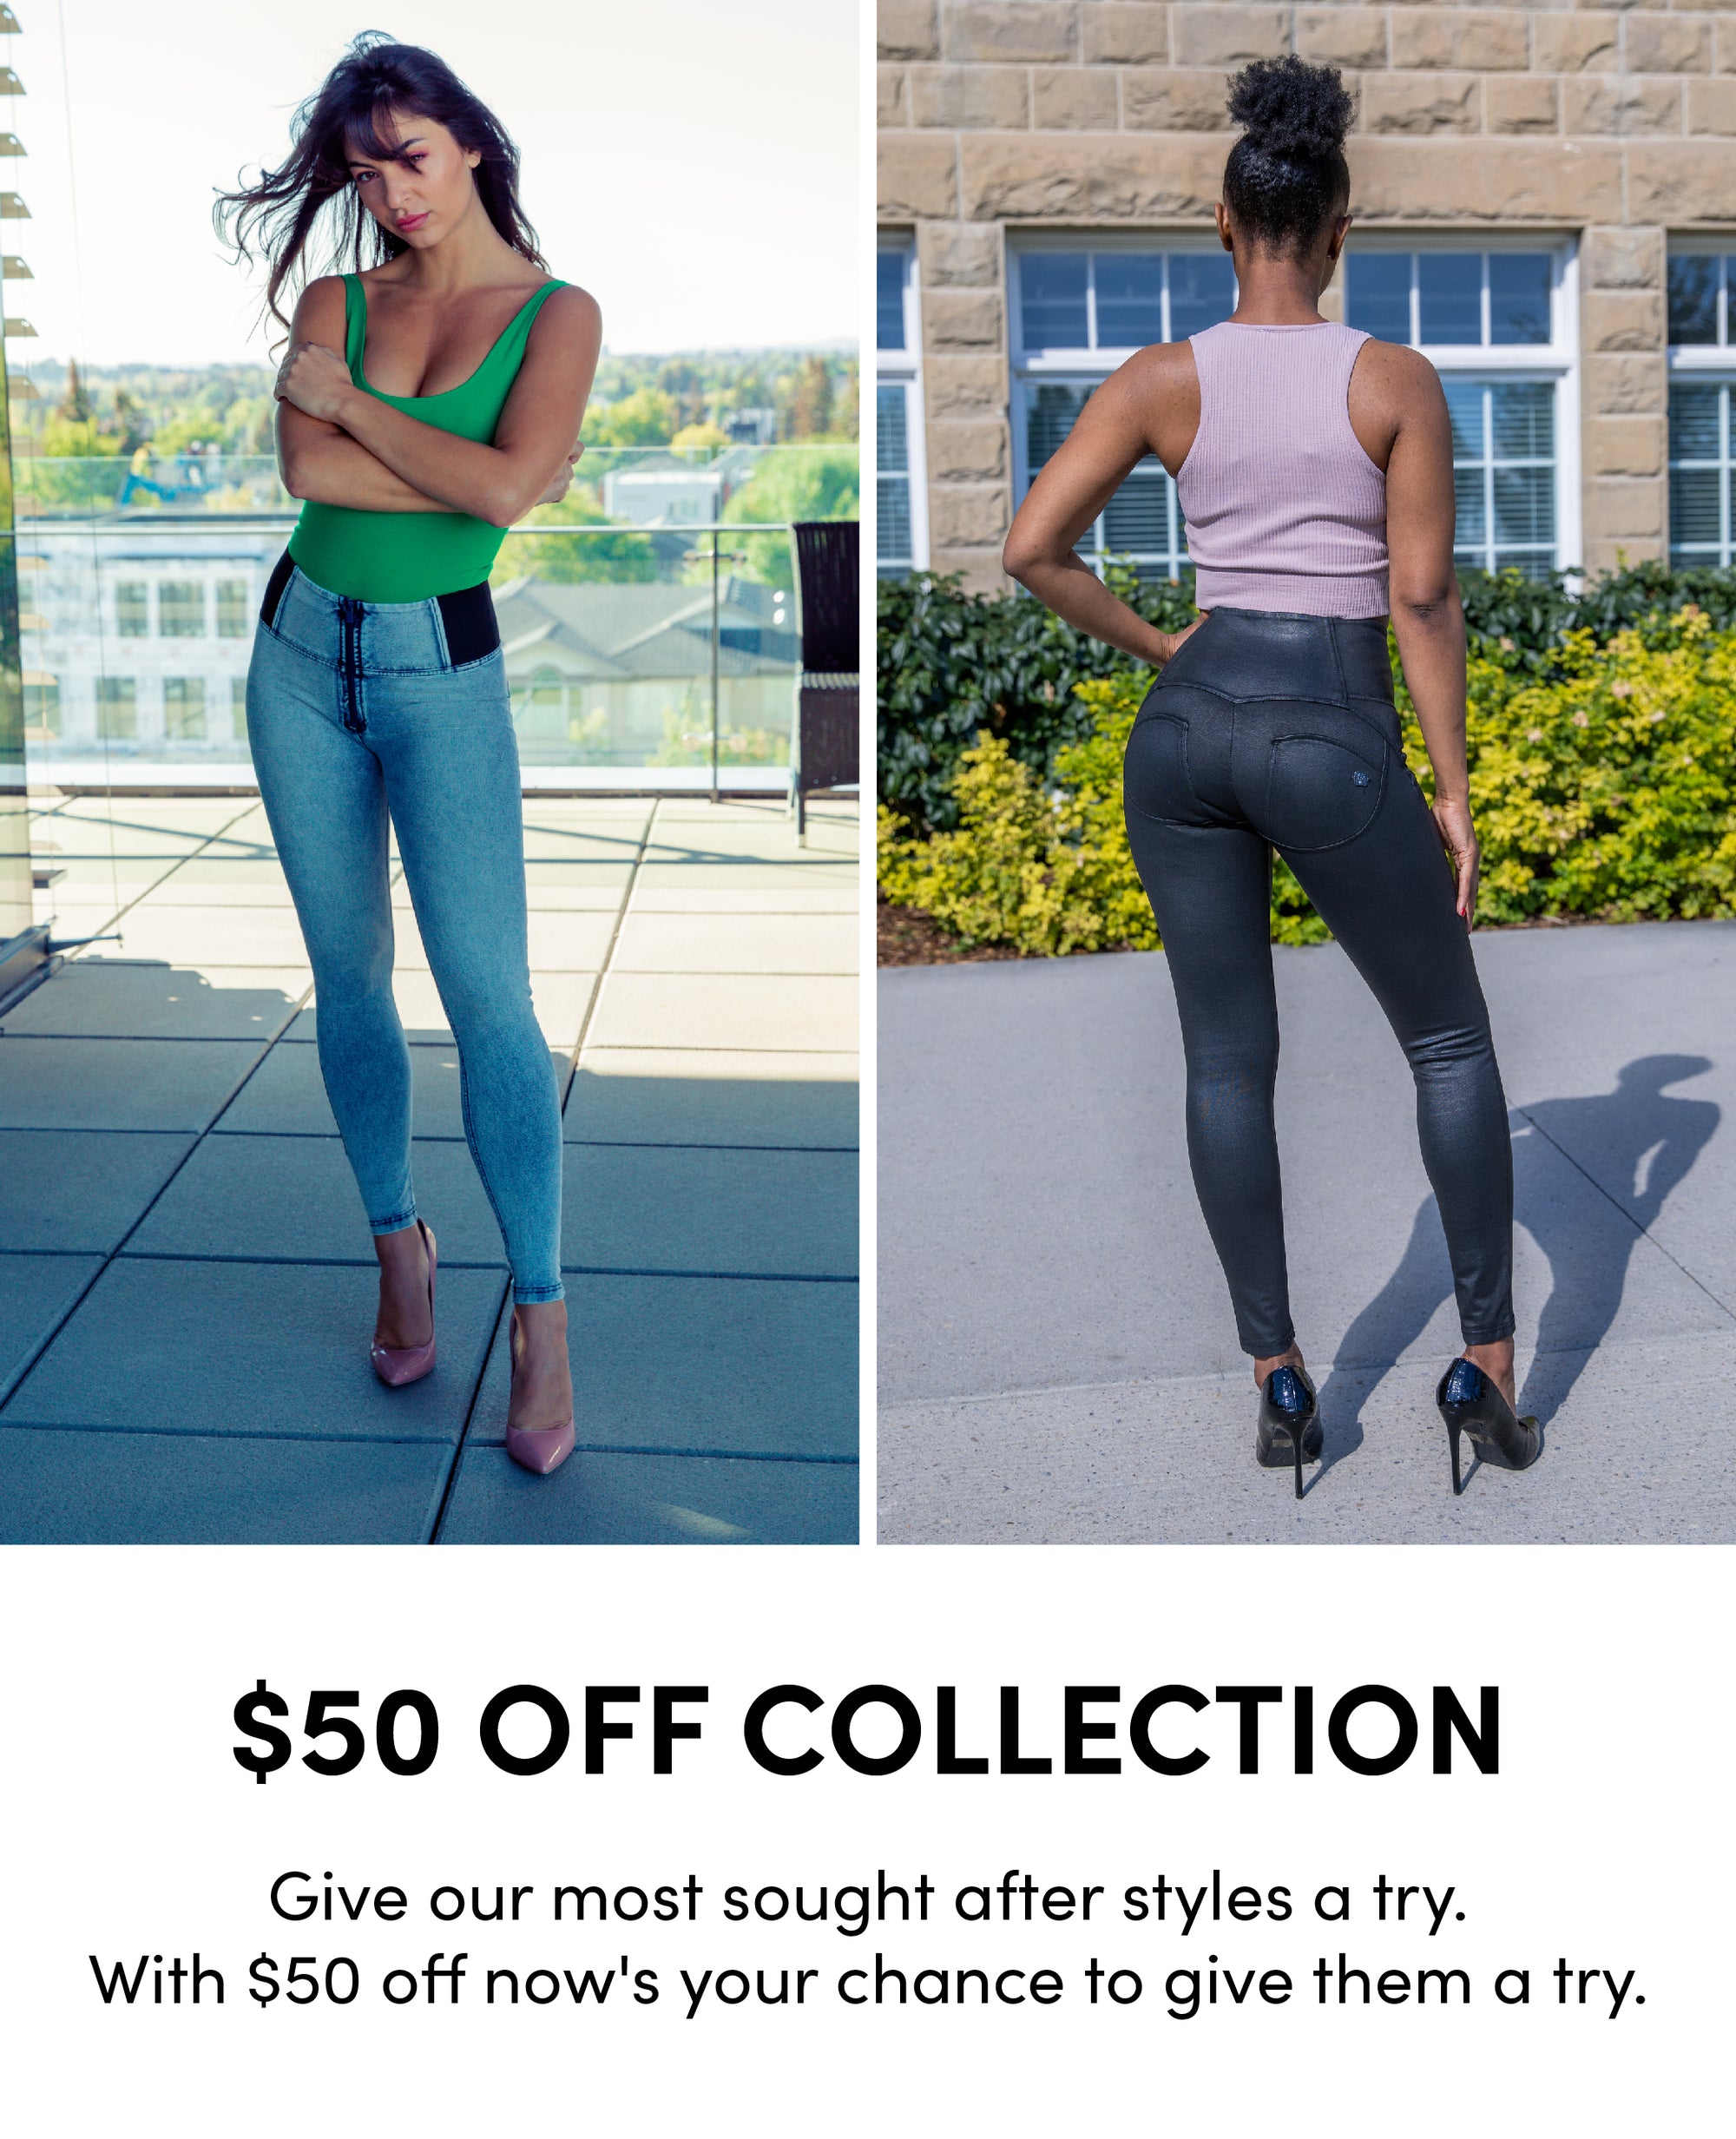 $50 Off Collection